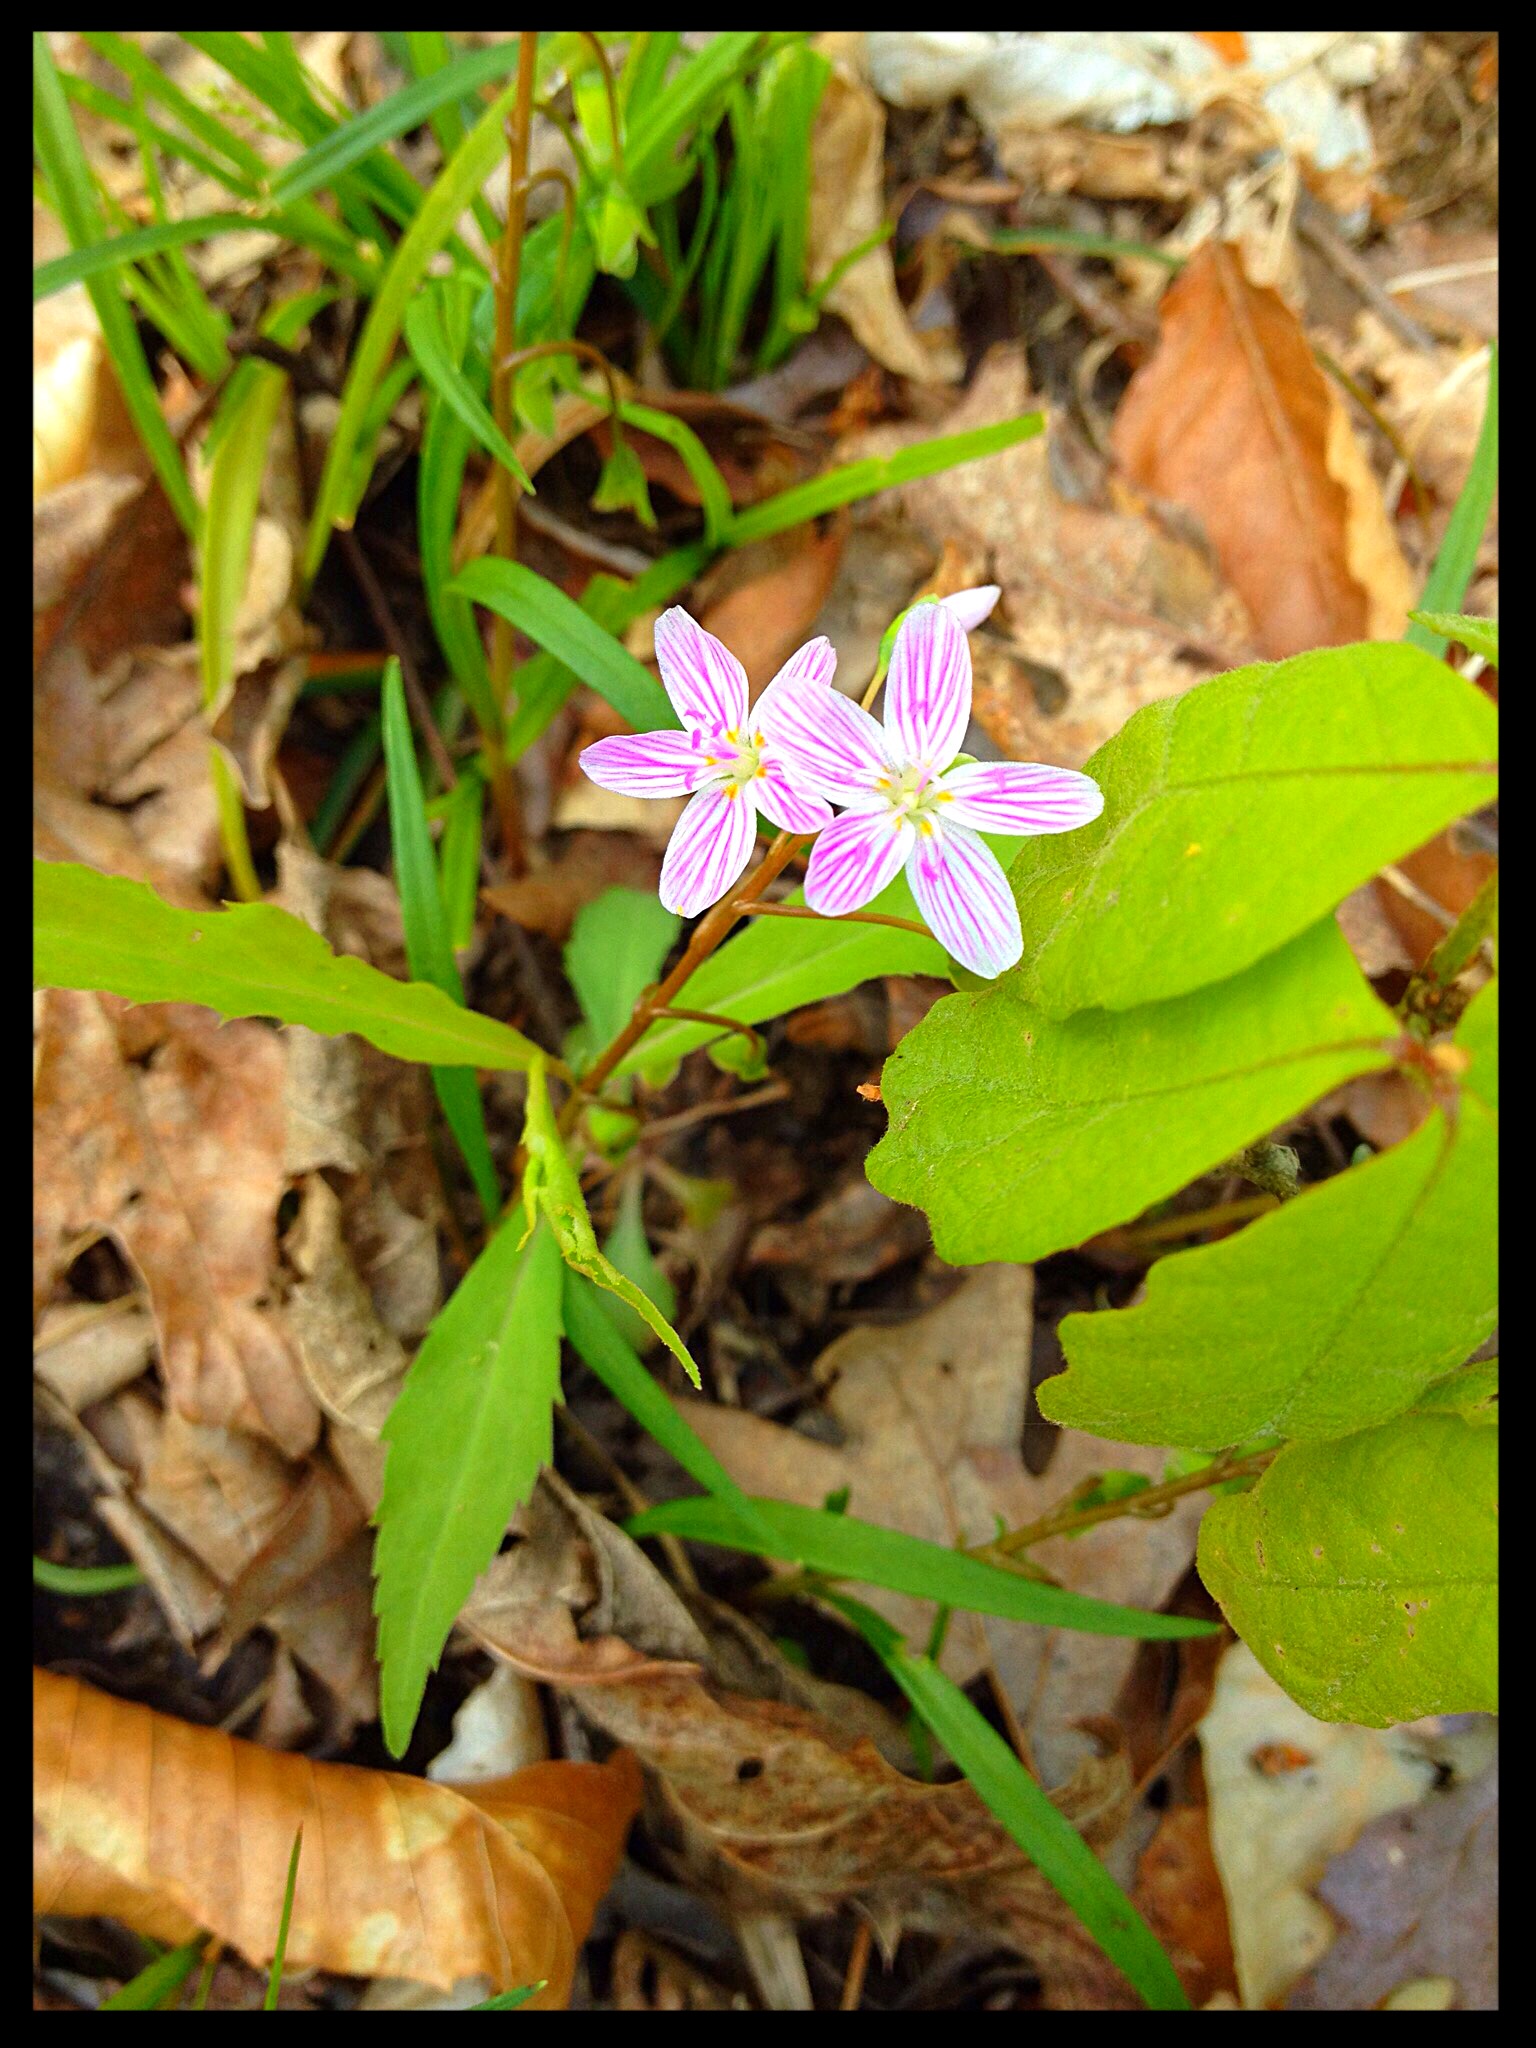 Spring beauties hide close to fallen leaves in the soft earth